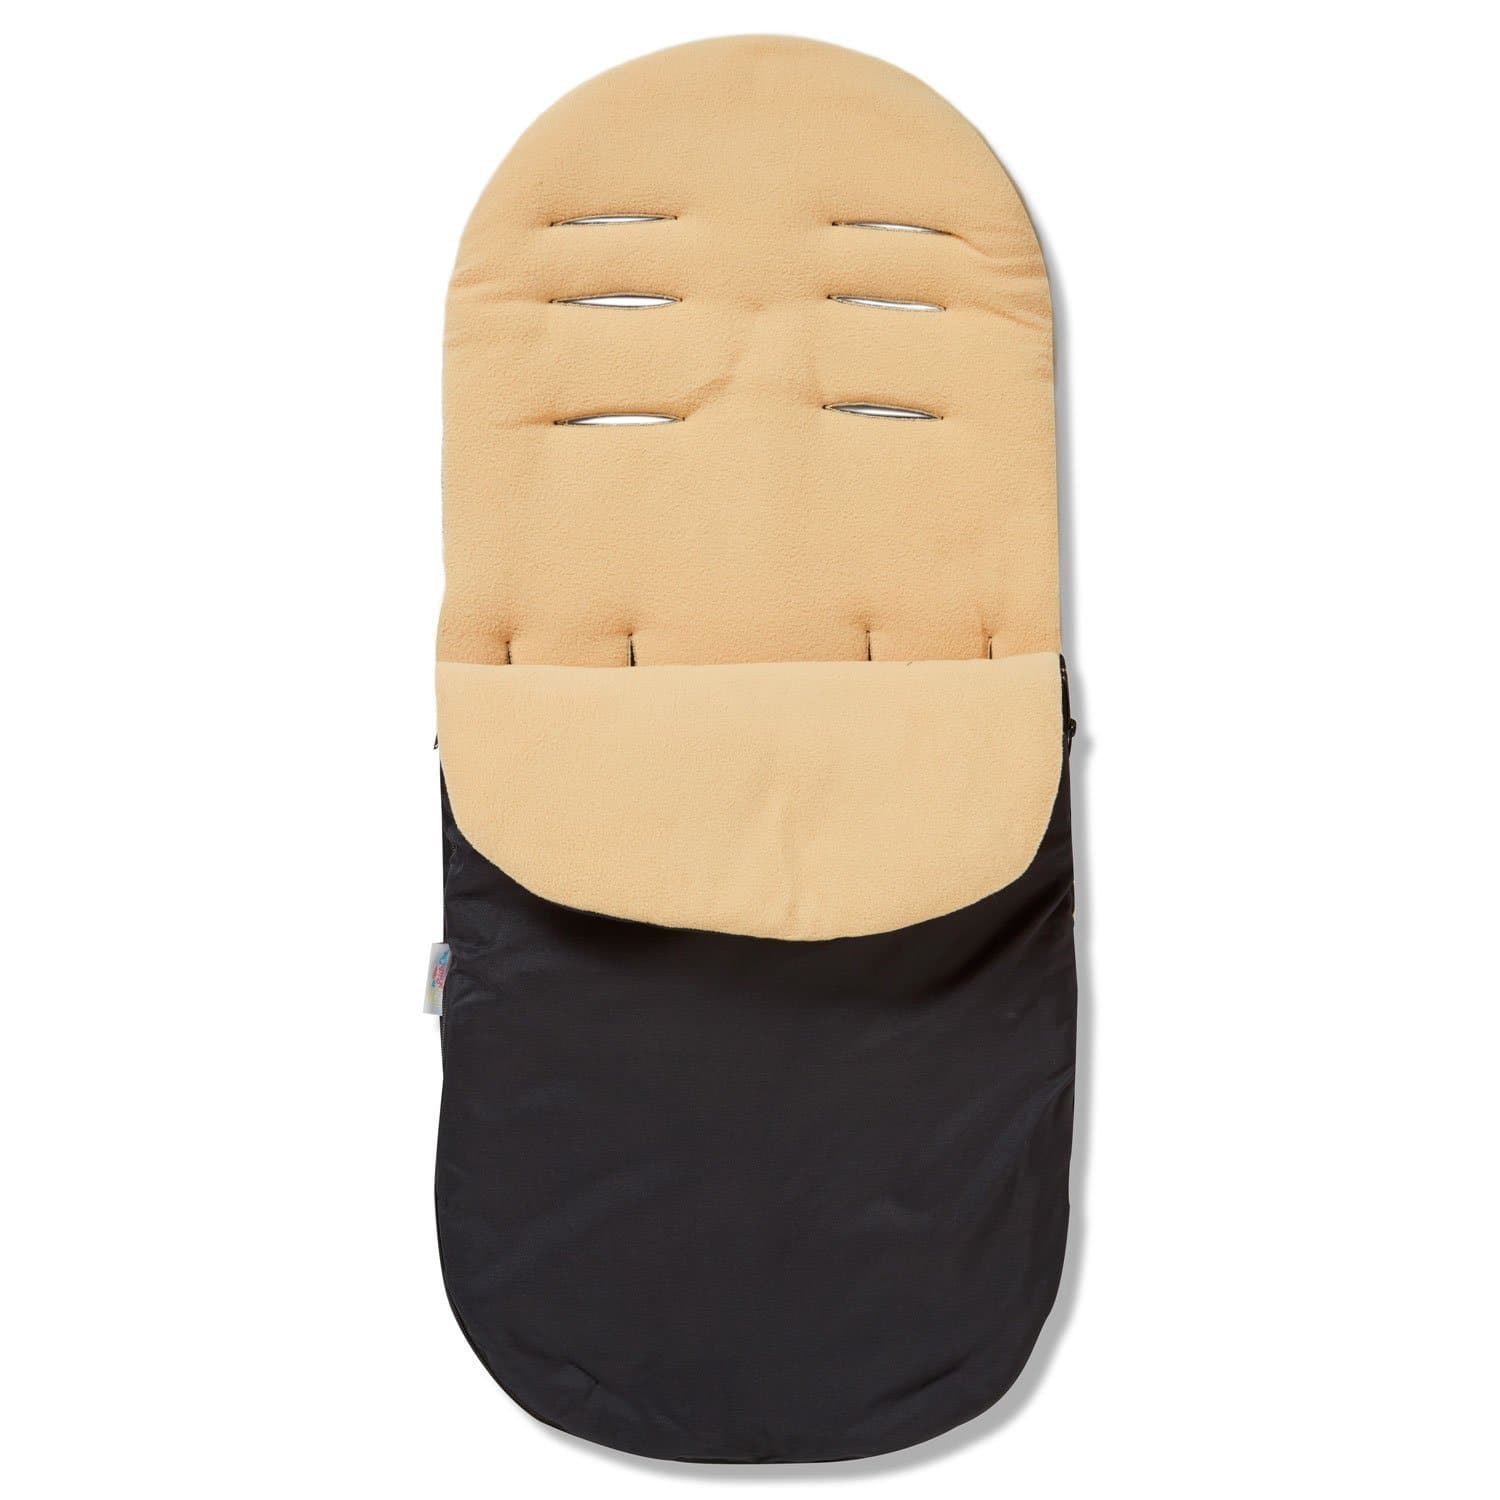 Footmuff / Cosy Toes Compatible with Bebe 9 - Sand / Fits All Models | For Your Little One